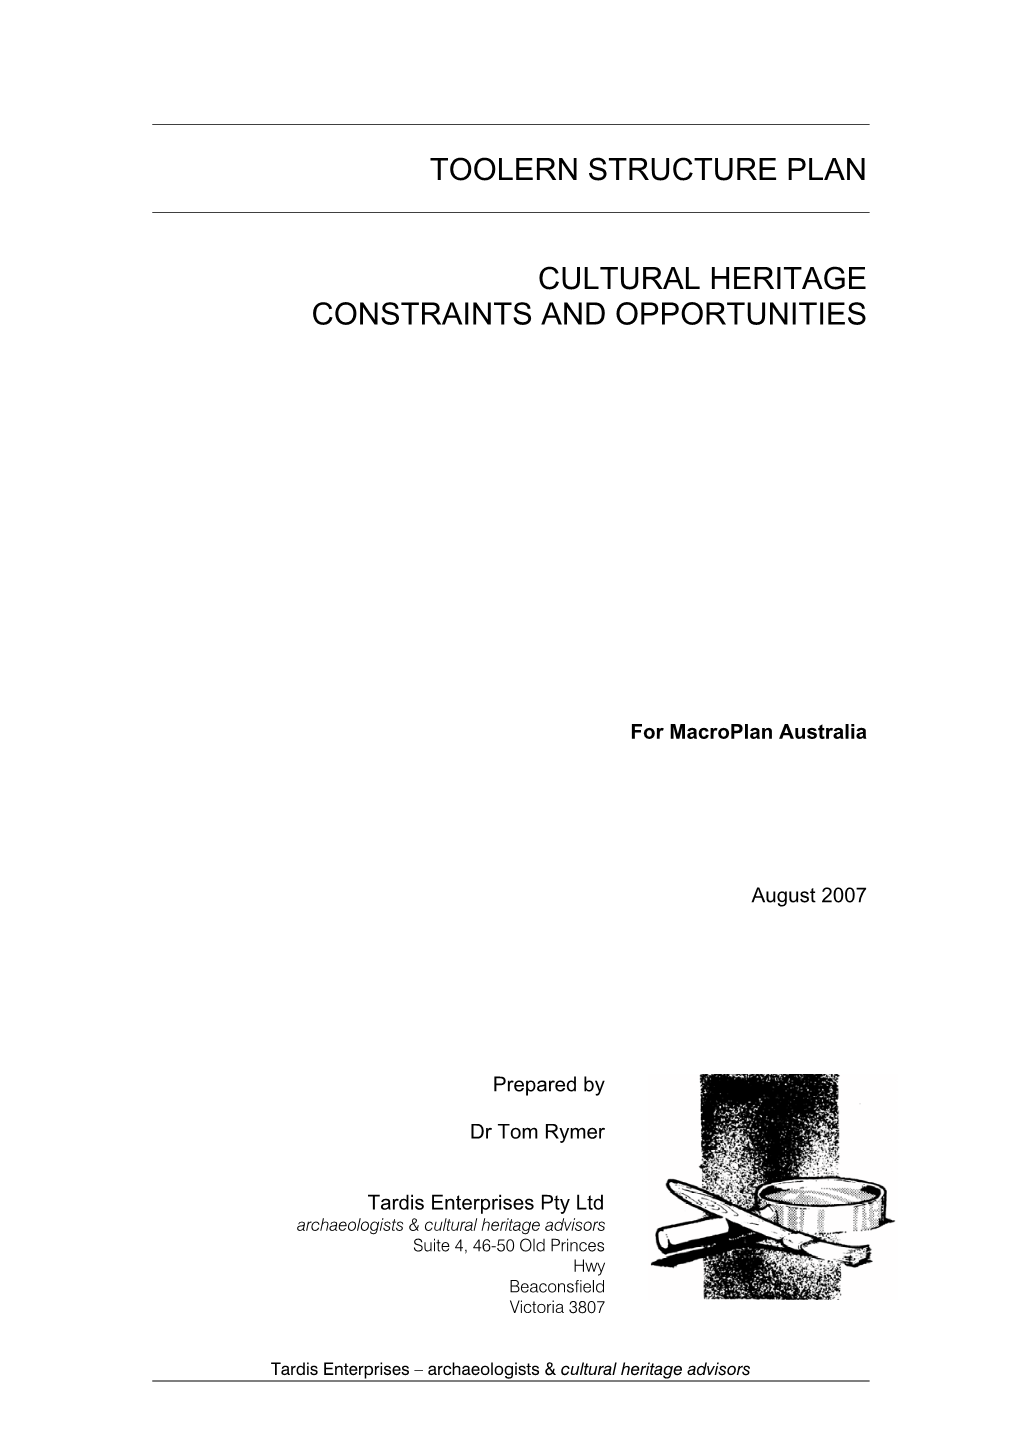 Toolern Structure Plan Cultural Heritage Constraints and Opportunities